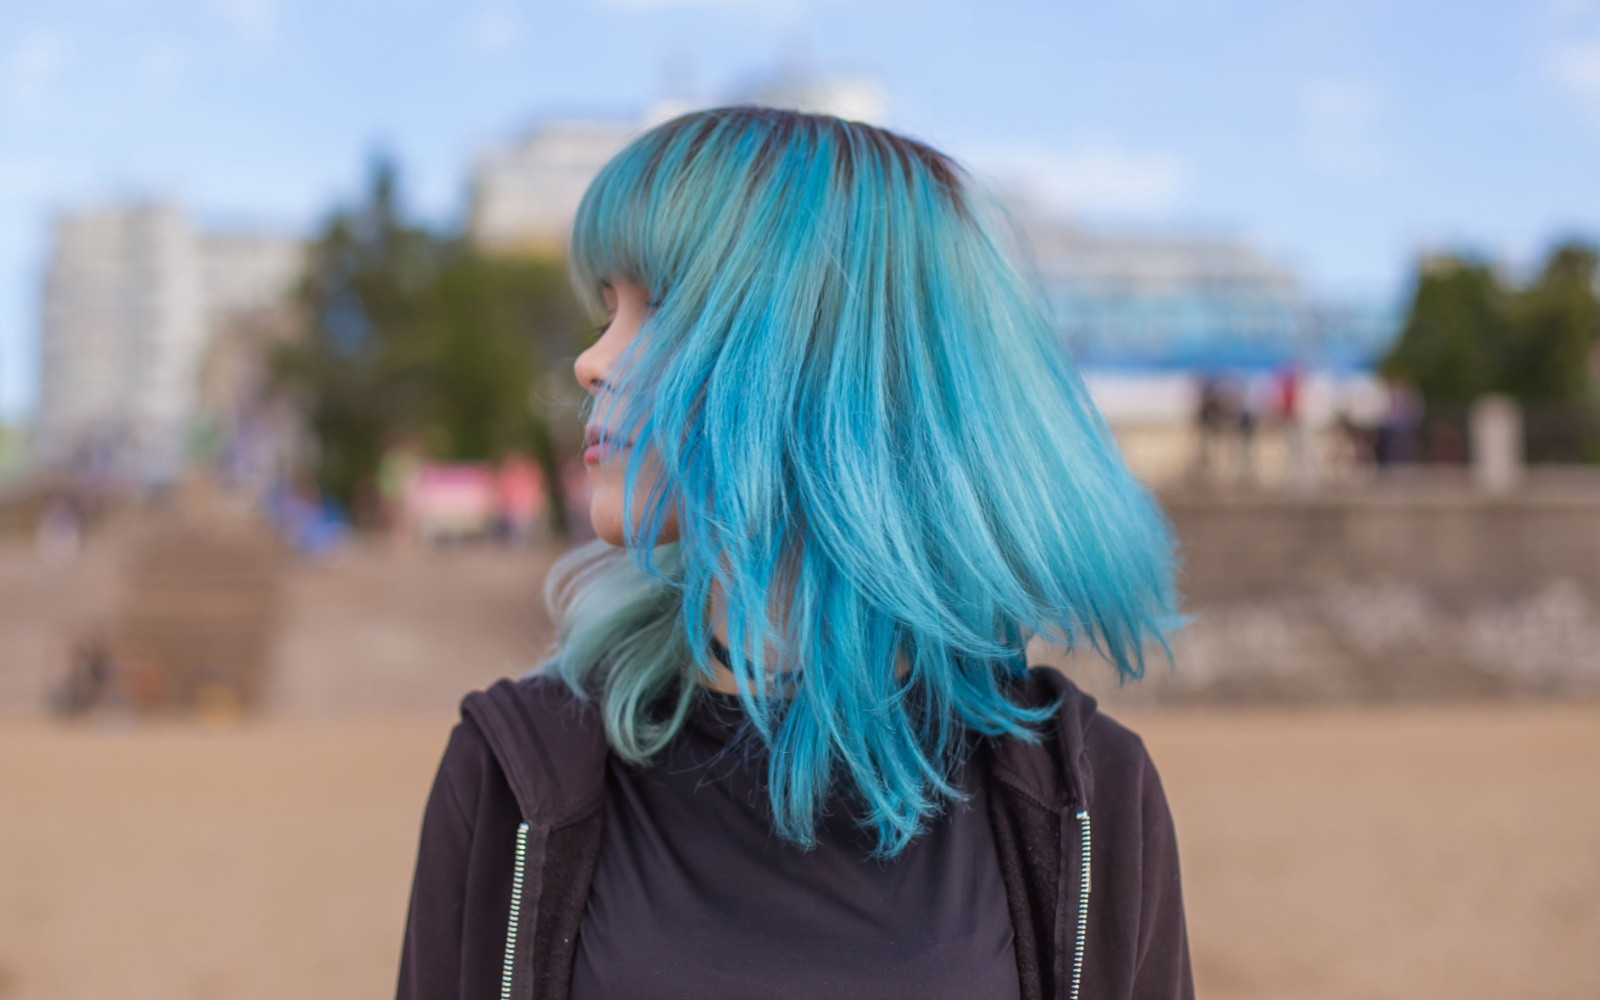 9. 15 Stunning Pastel Blue Hair Color Ideas with Dark Roots - wide 7